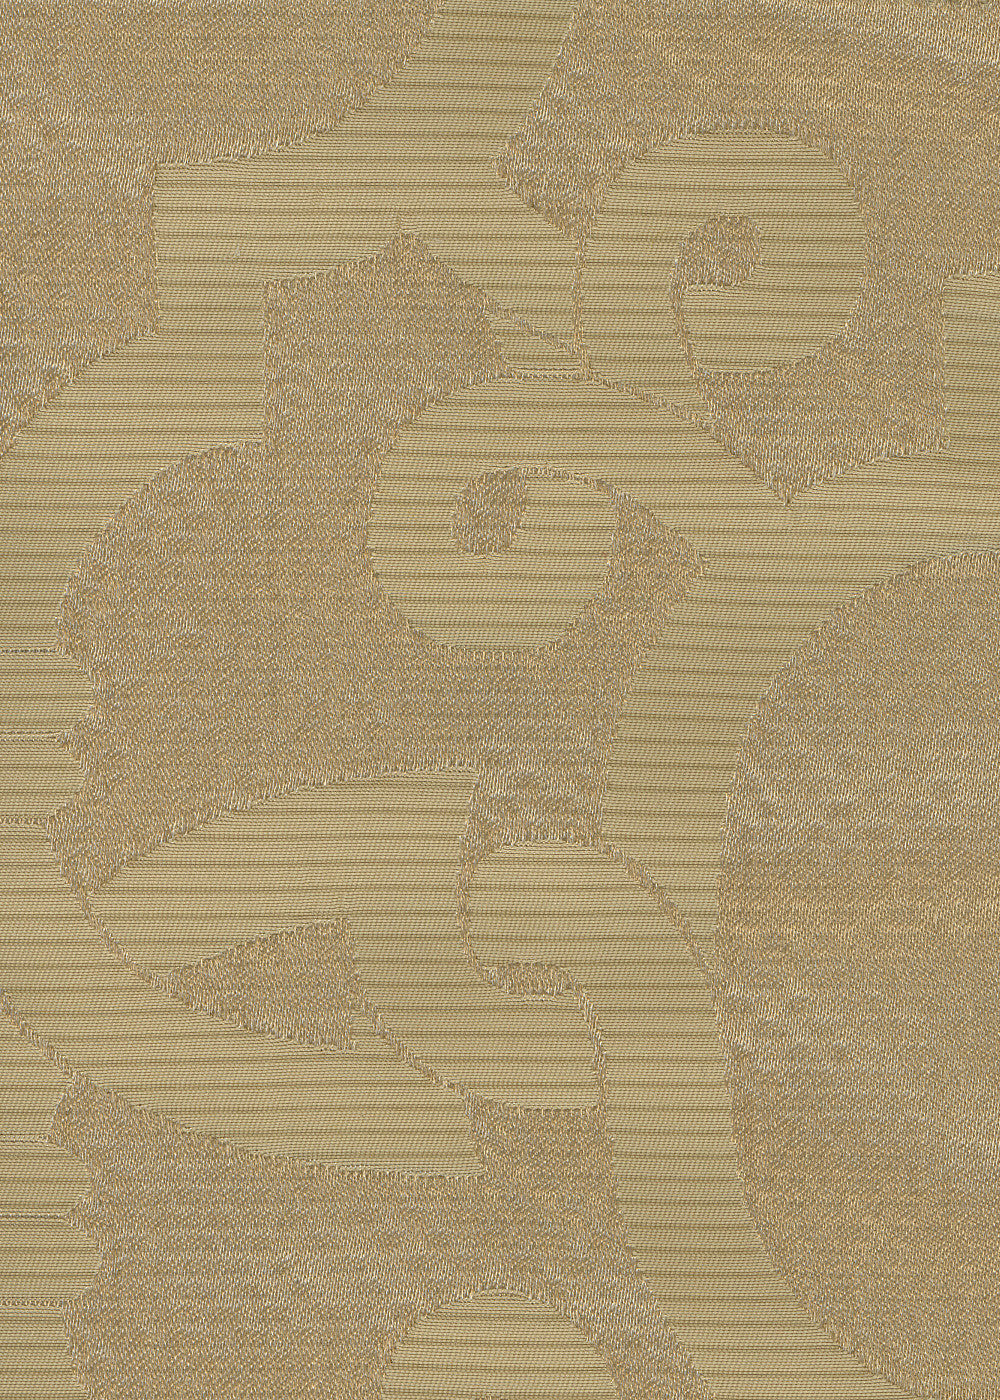 close up of gold fabric with a geometric lattice pattern